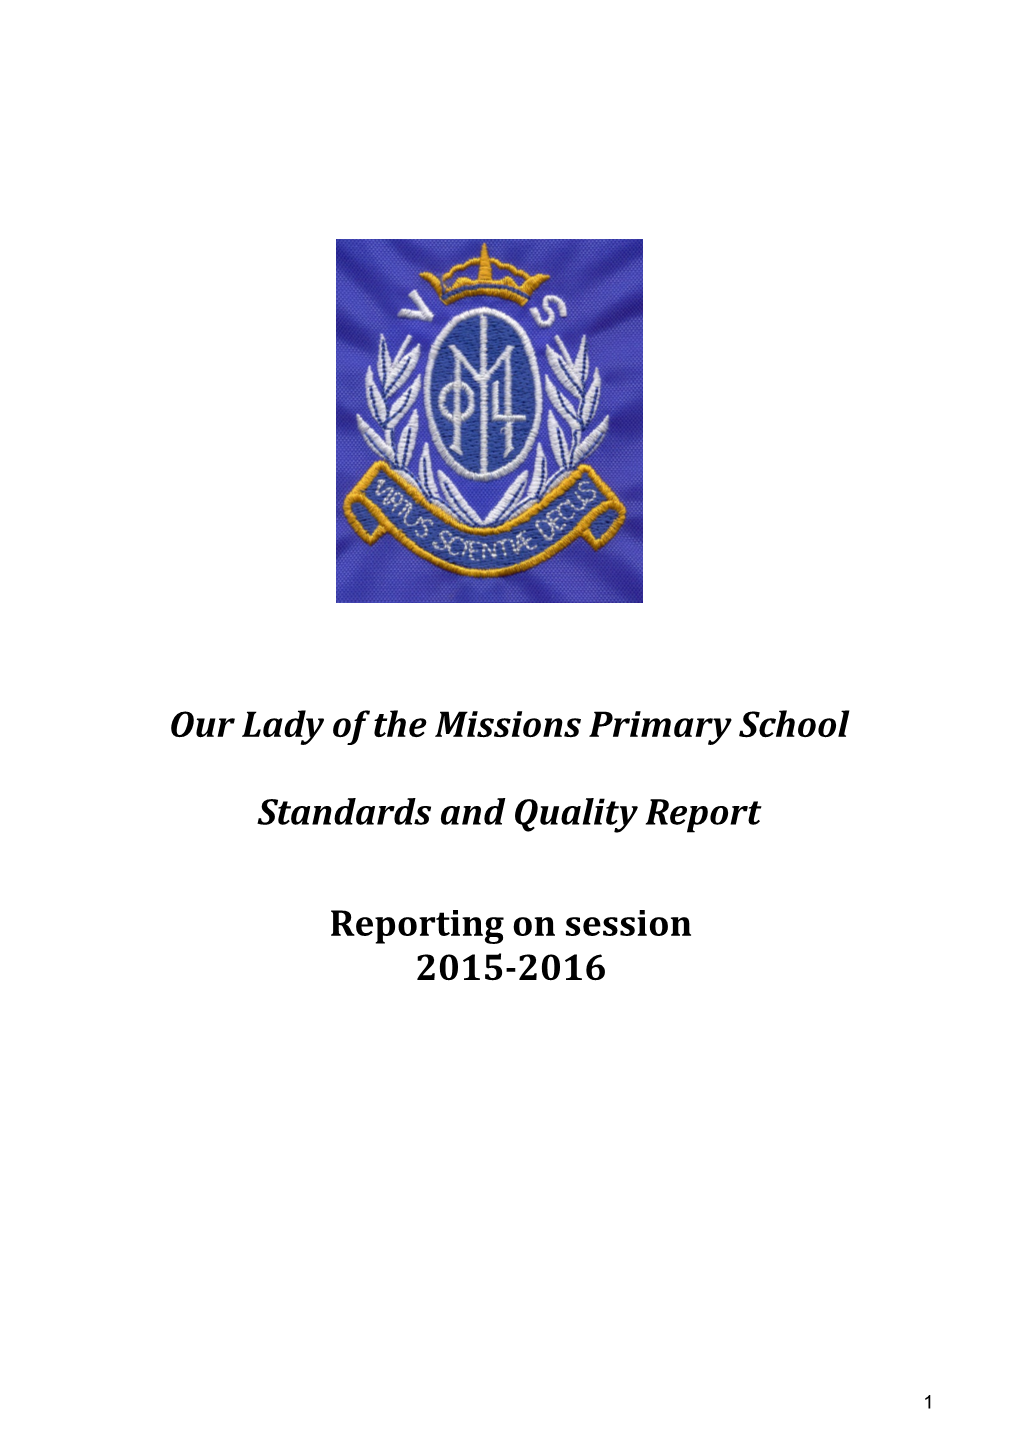 Standards and Quality Report